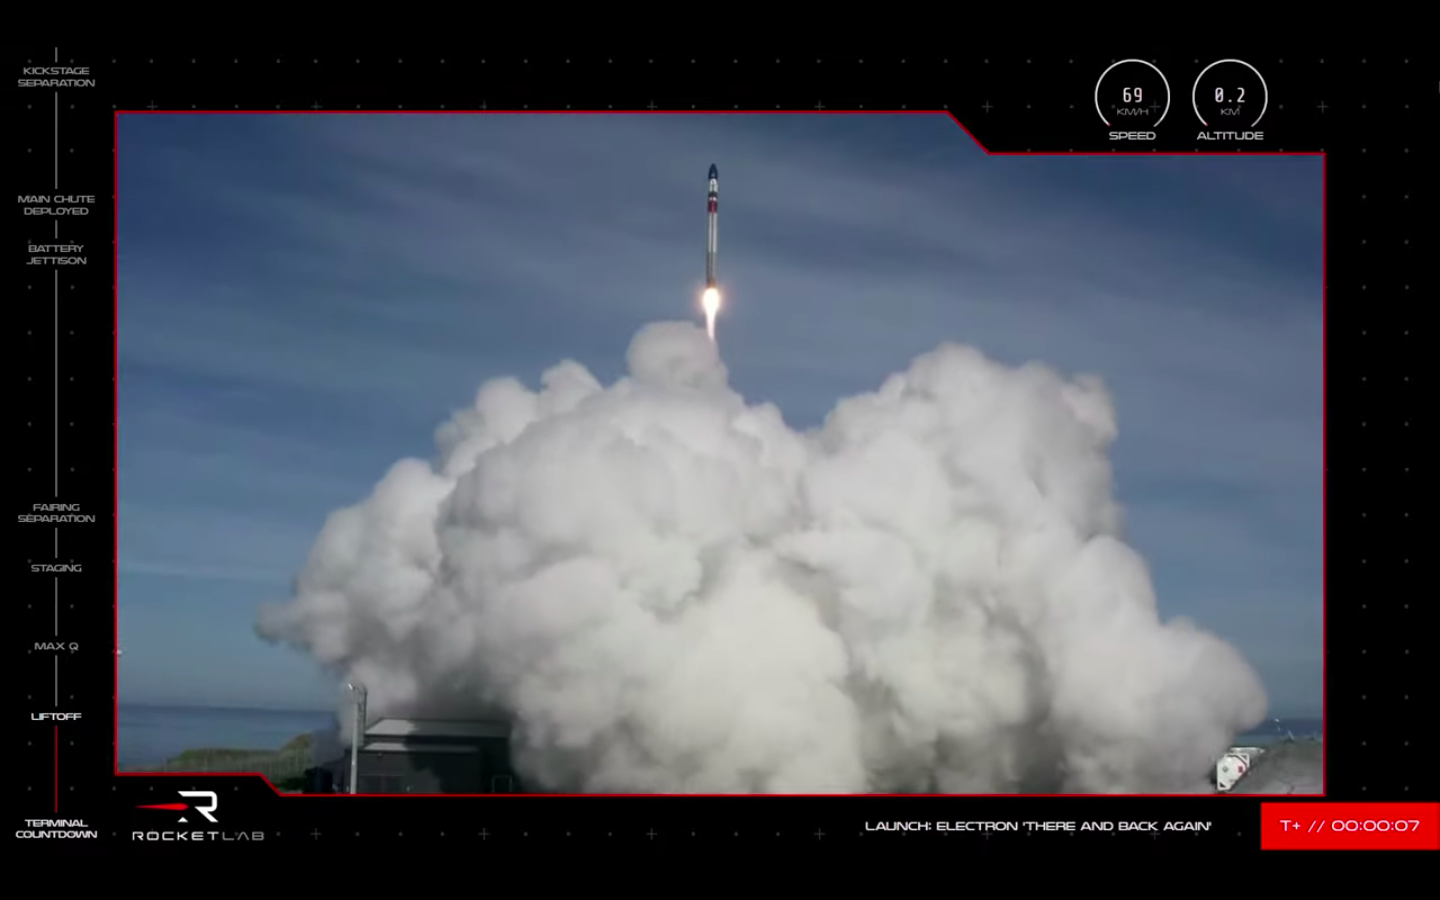 A Rocket Lab Electron vehicle launches on the "There And Back Again" mission on May 2, 2022. The rocket carried 34 satellites toward low Earth orbit.